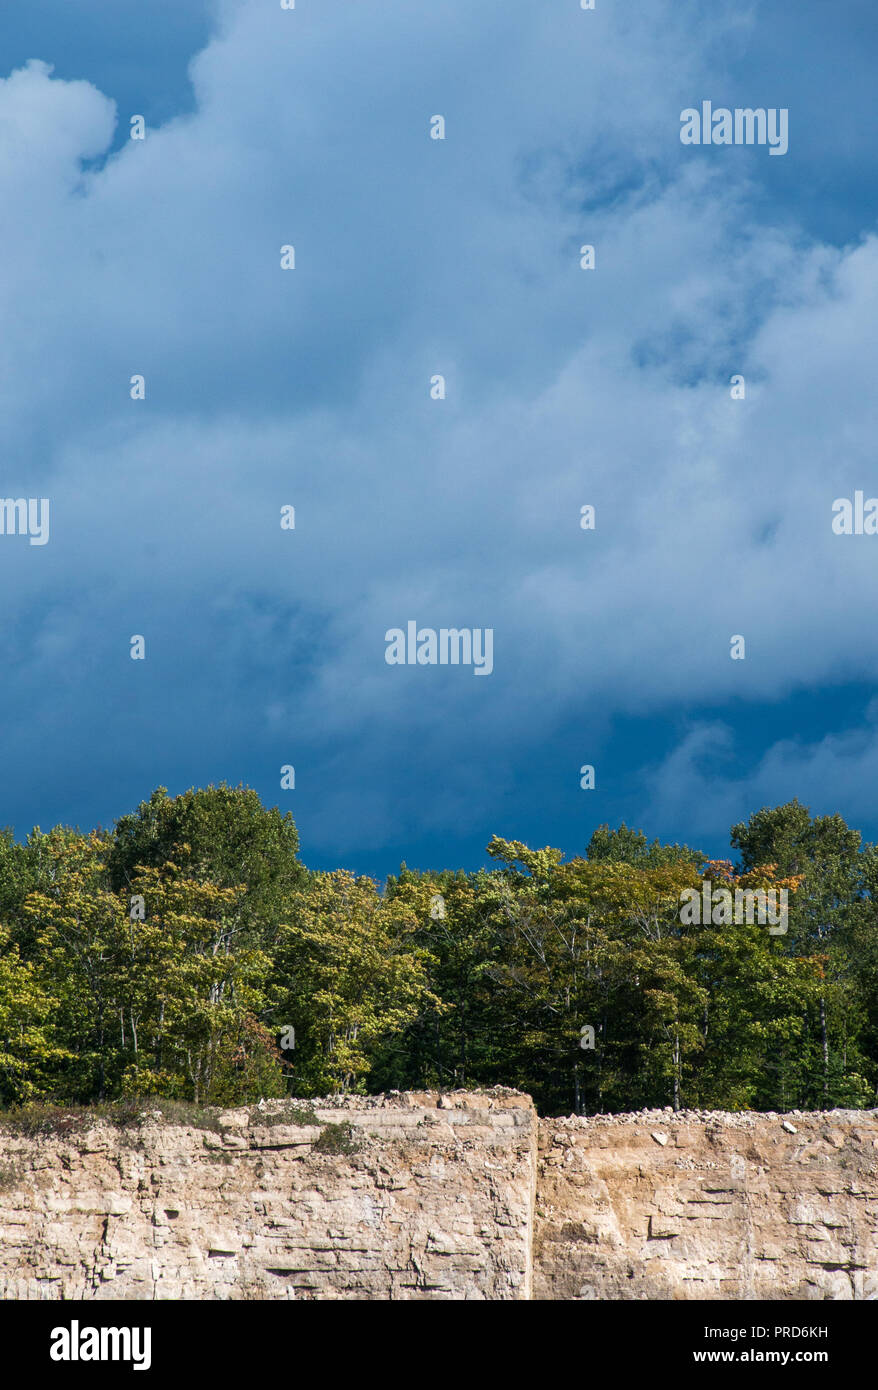 Dark sky and clouds background with trees and limestone quarry rock face in autumn landscape Stock Photo